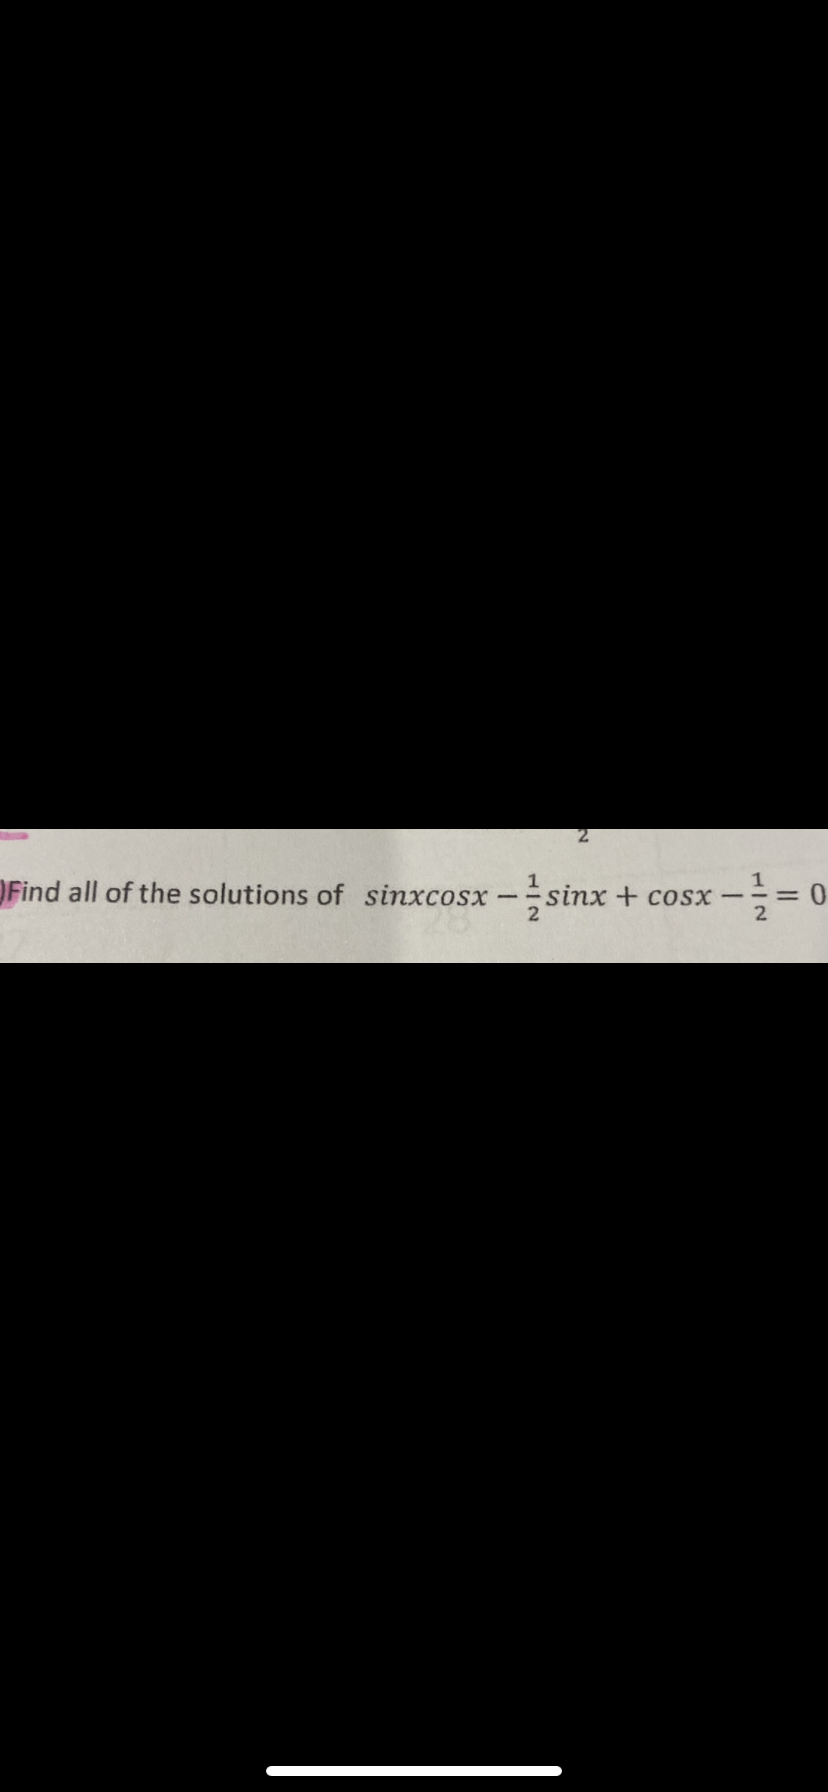 21
OFind all of the solutions of sinxcosx sinx + cosx
-sinx
|
2
